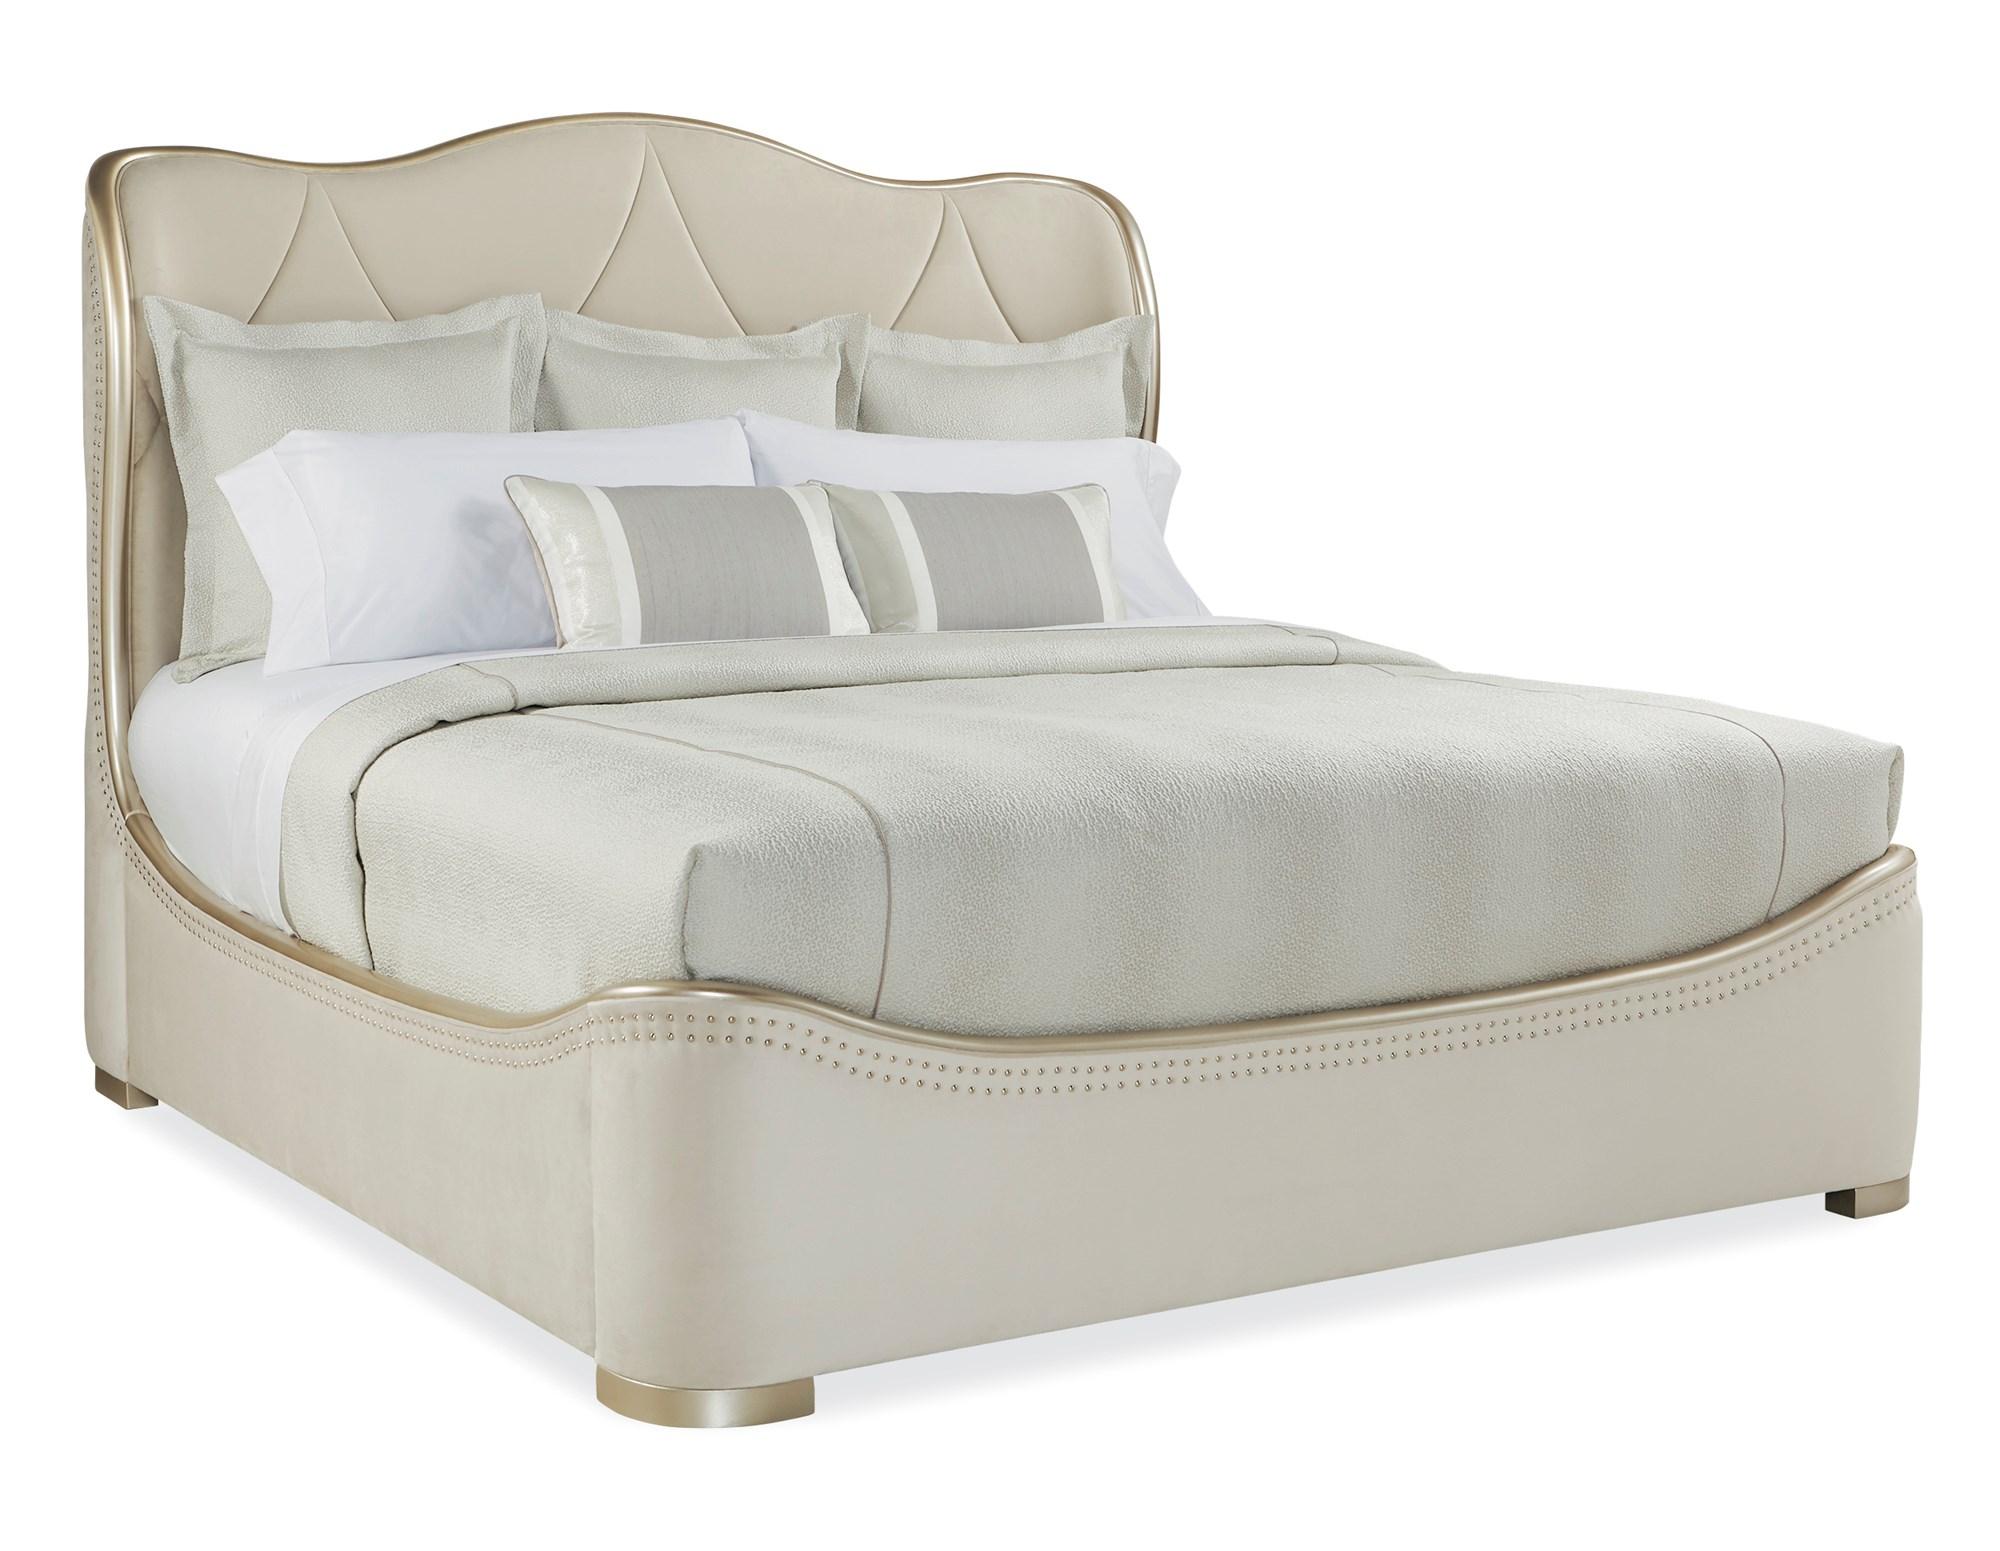 Caracole ADELA CAL KING BED Sleigh Bed